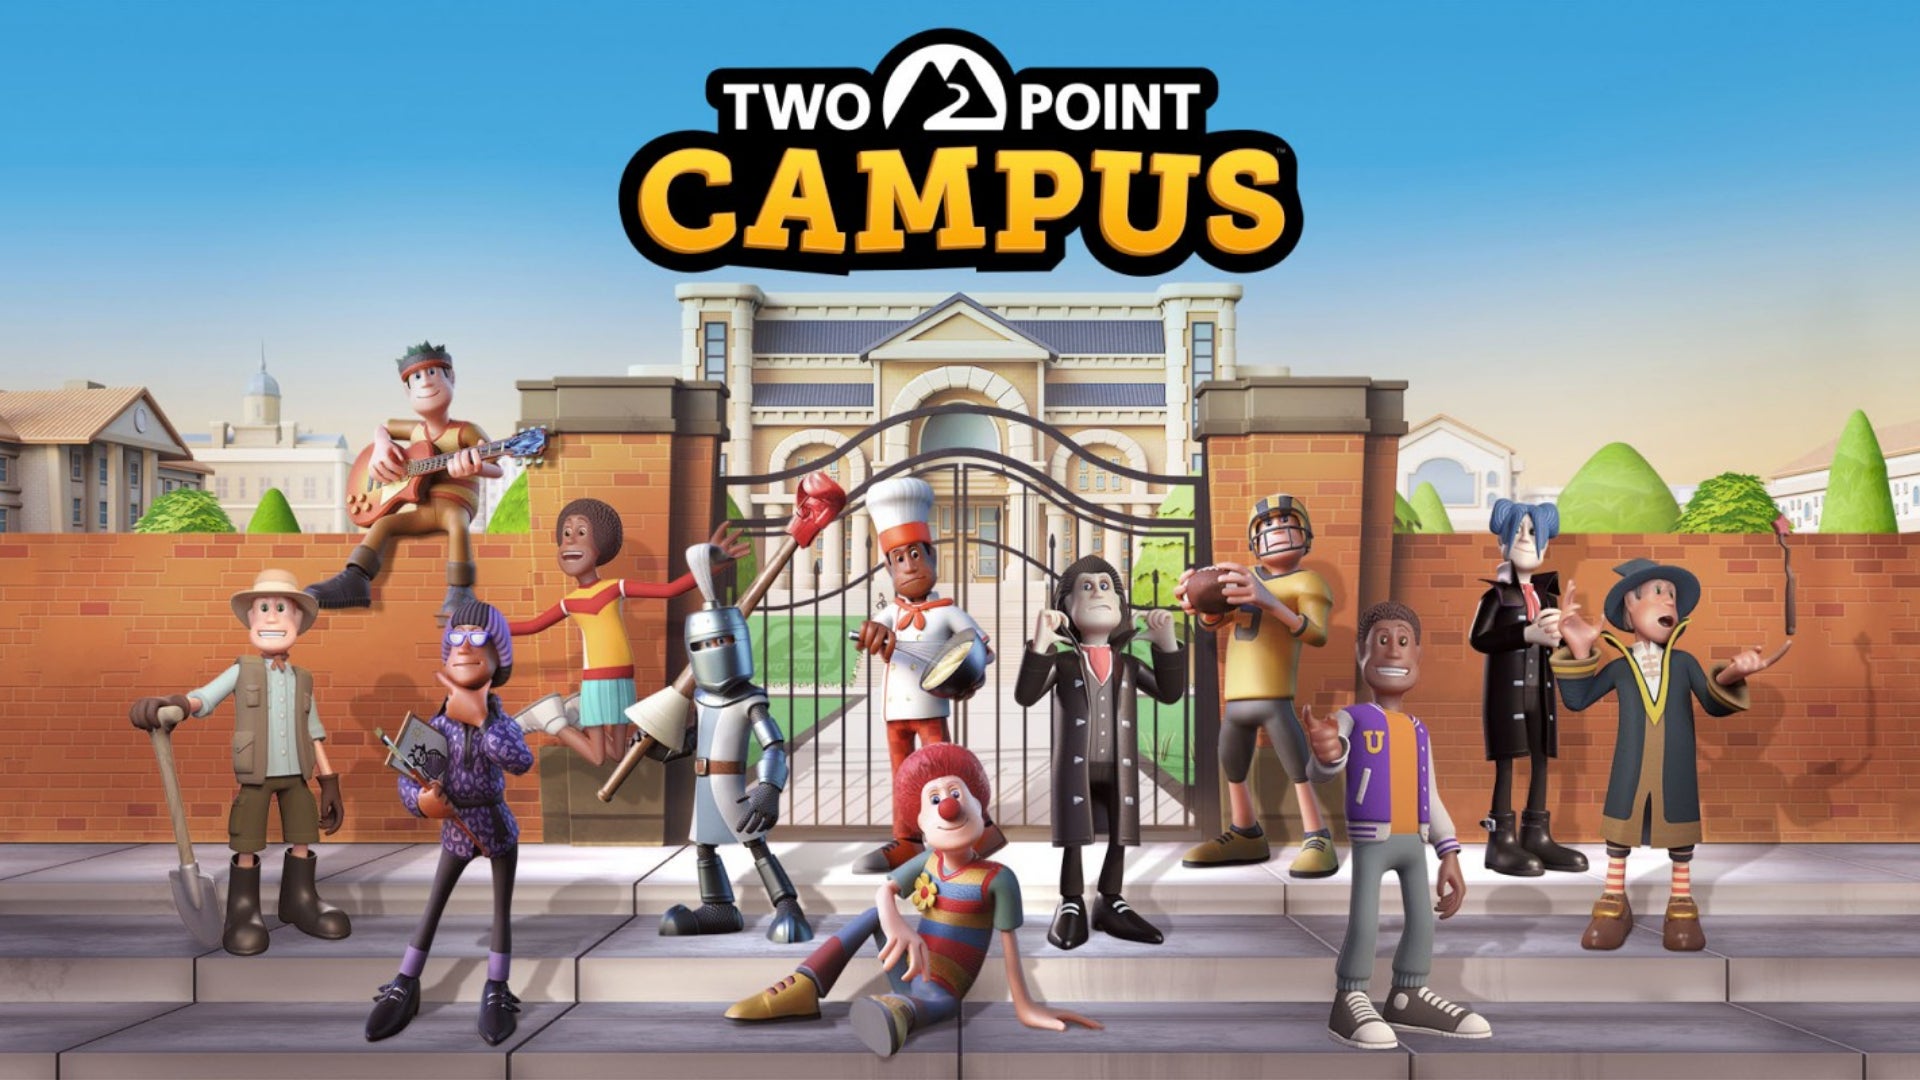 An array of students from varying subjects are shown standing outside of a college gate in this Two Point Campus artwork.